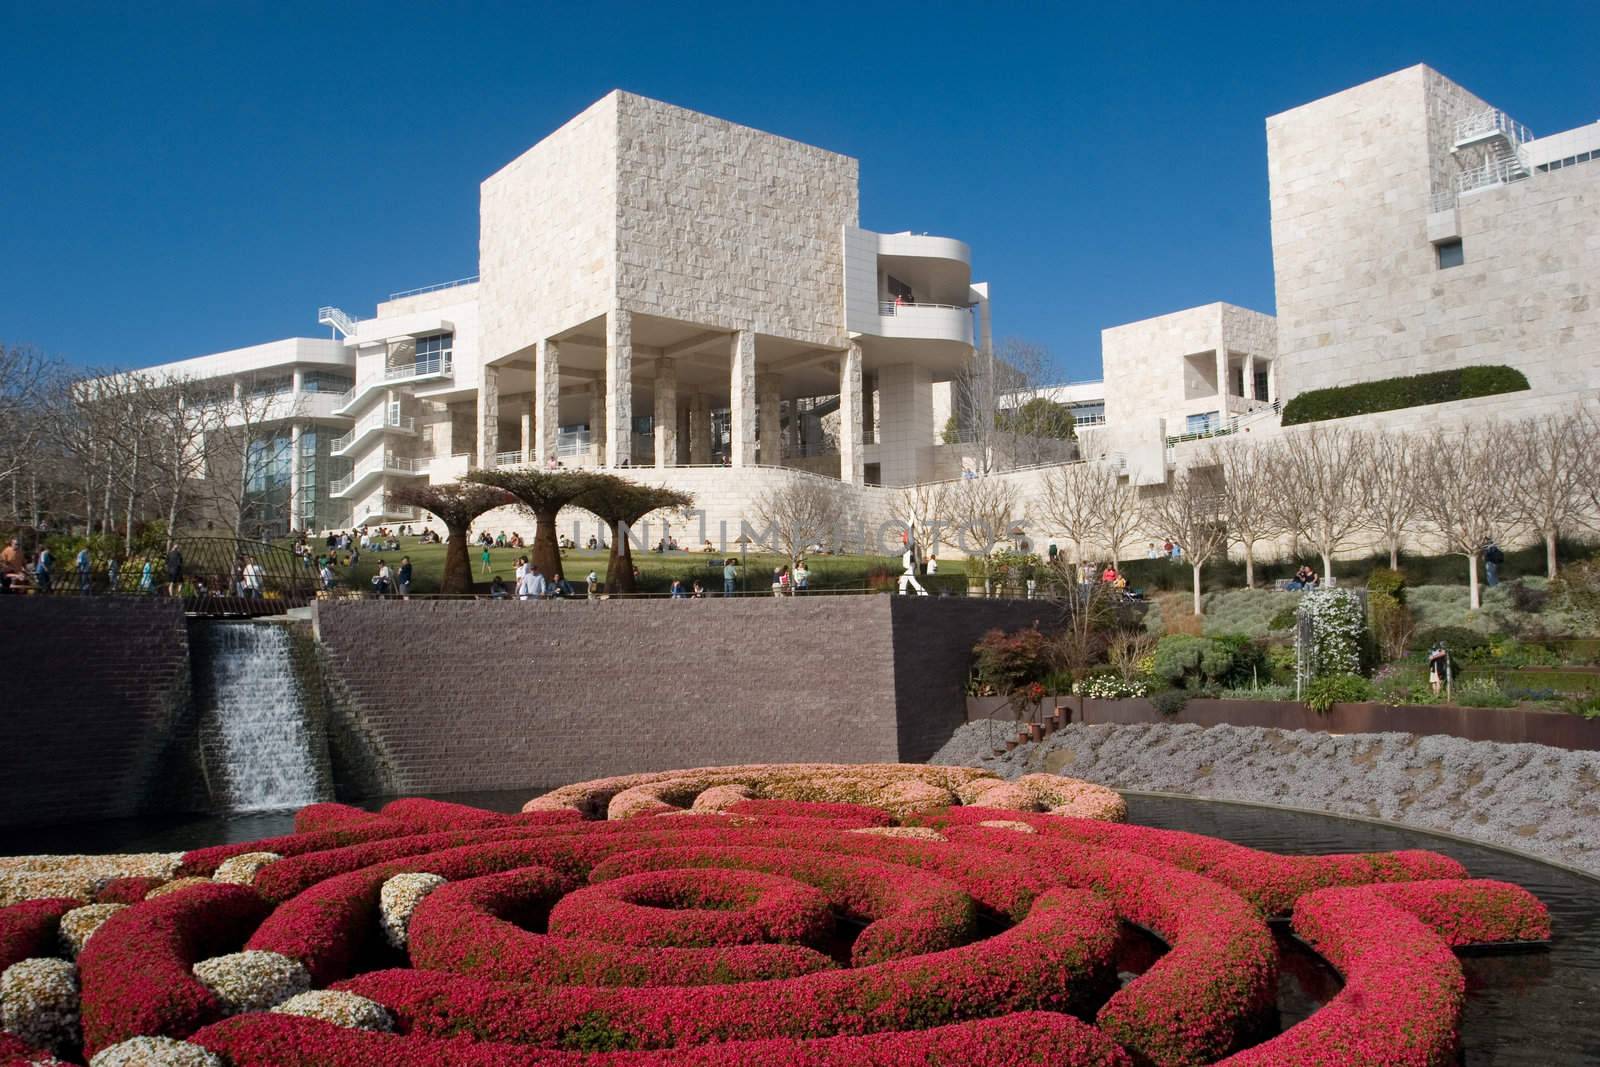 Getty Center by melastmohican